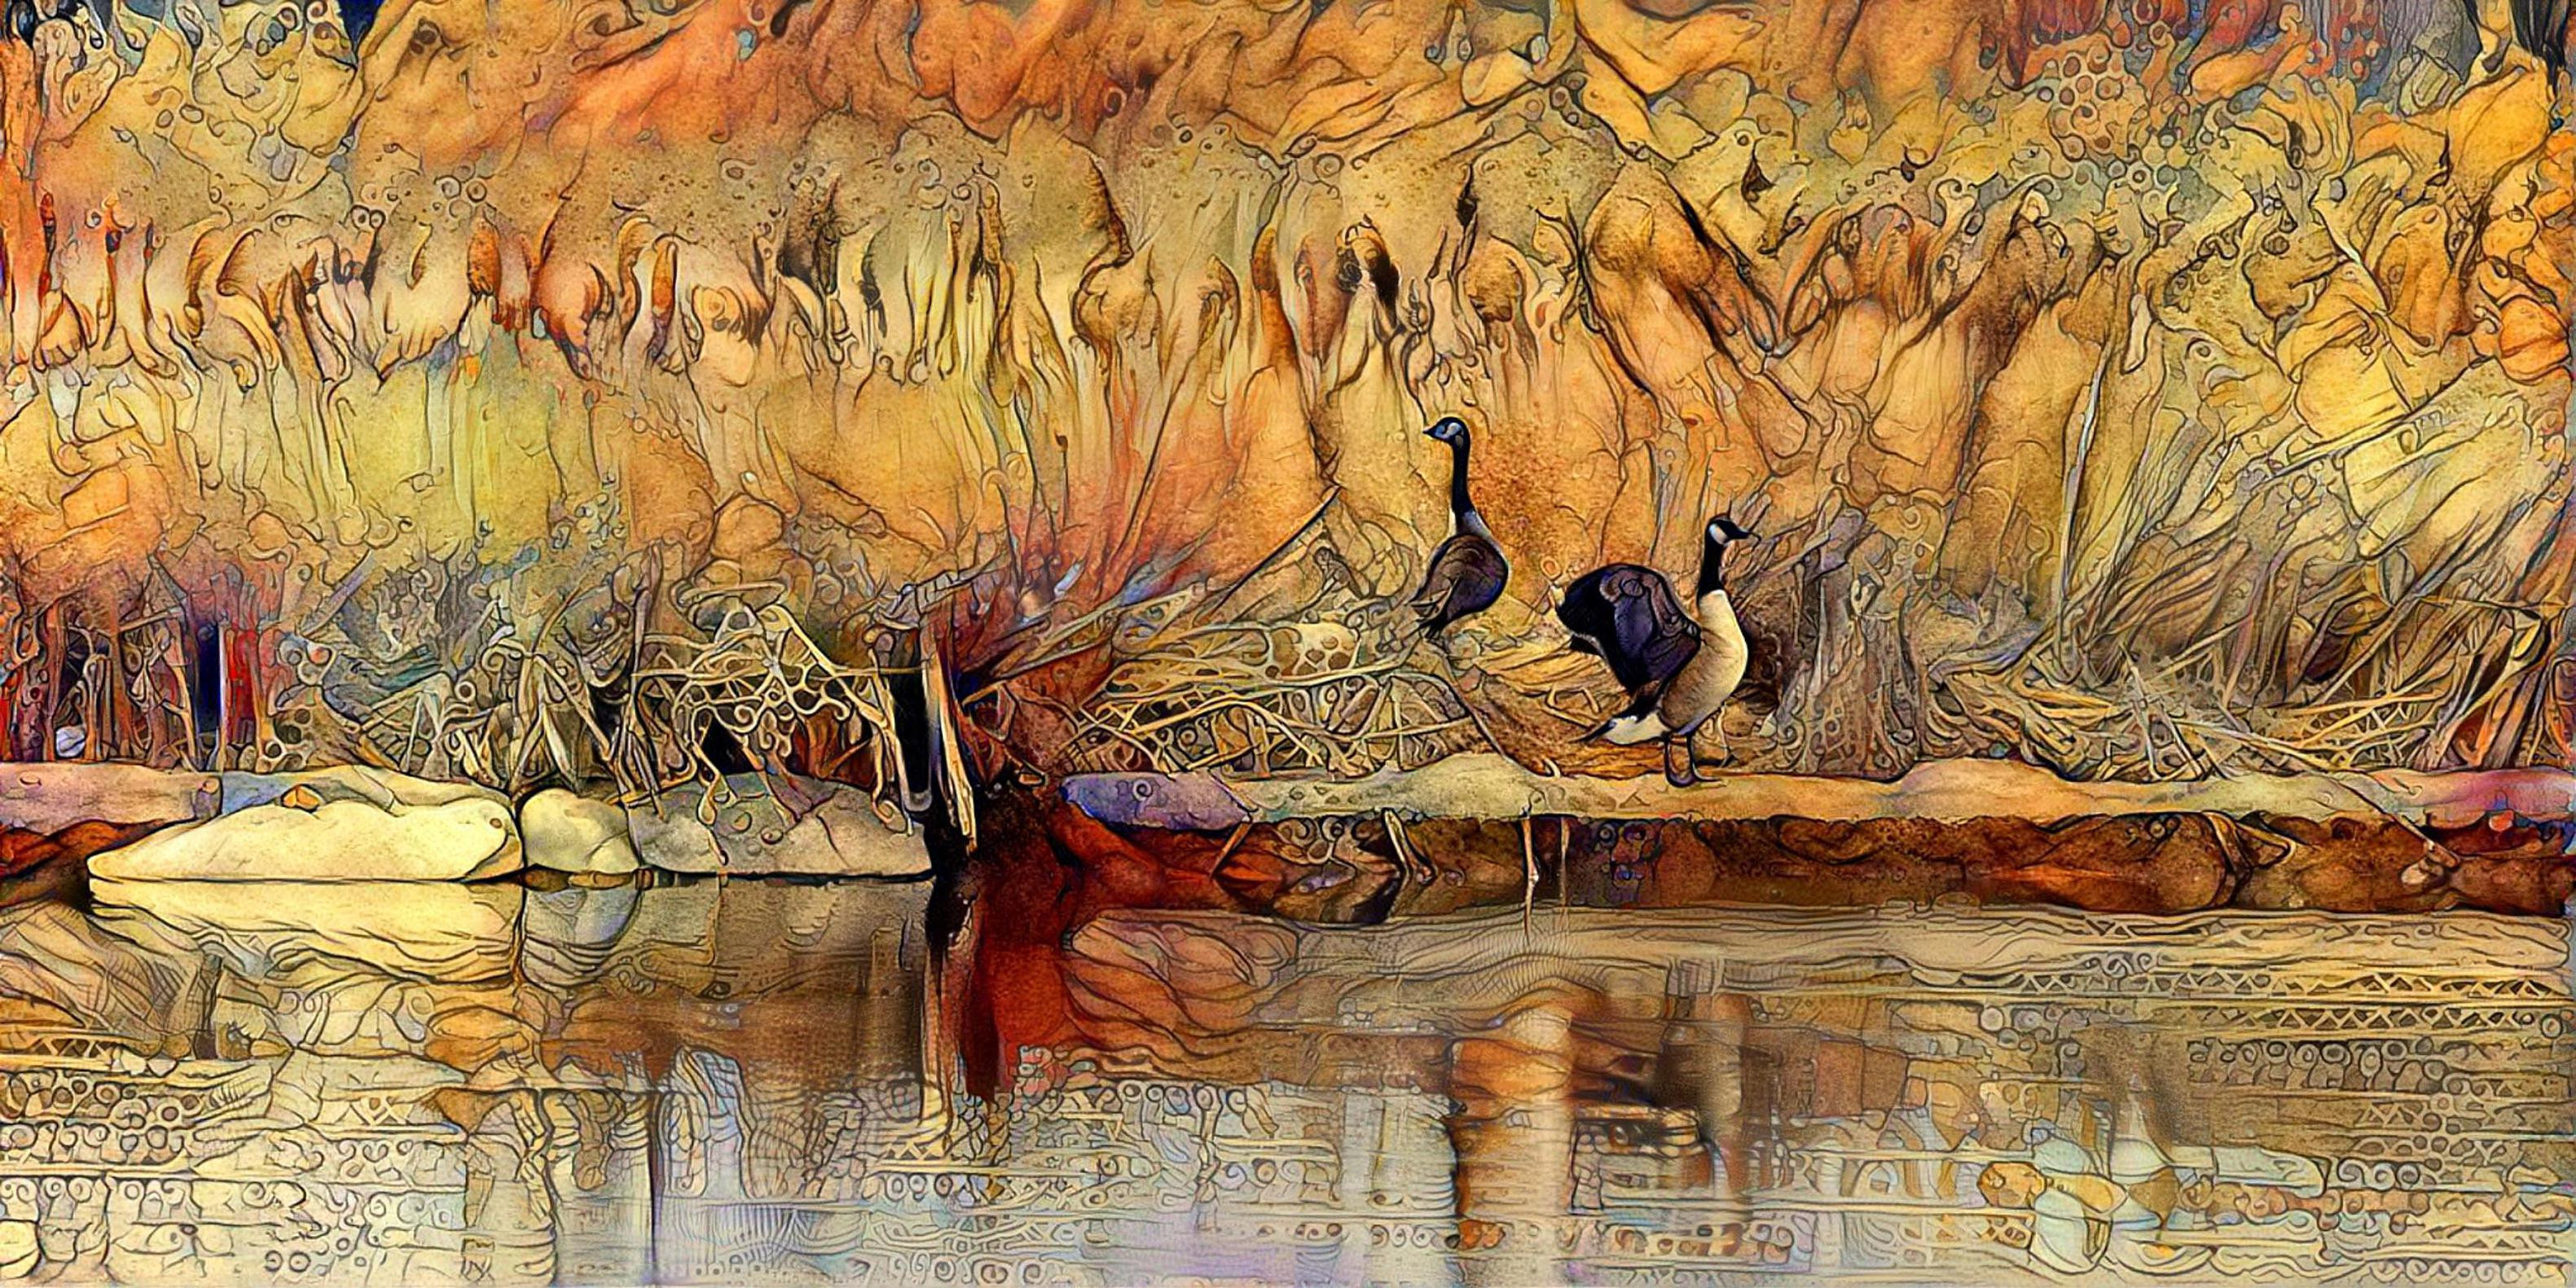 Migratory Geese in Autumn - 01